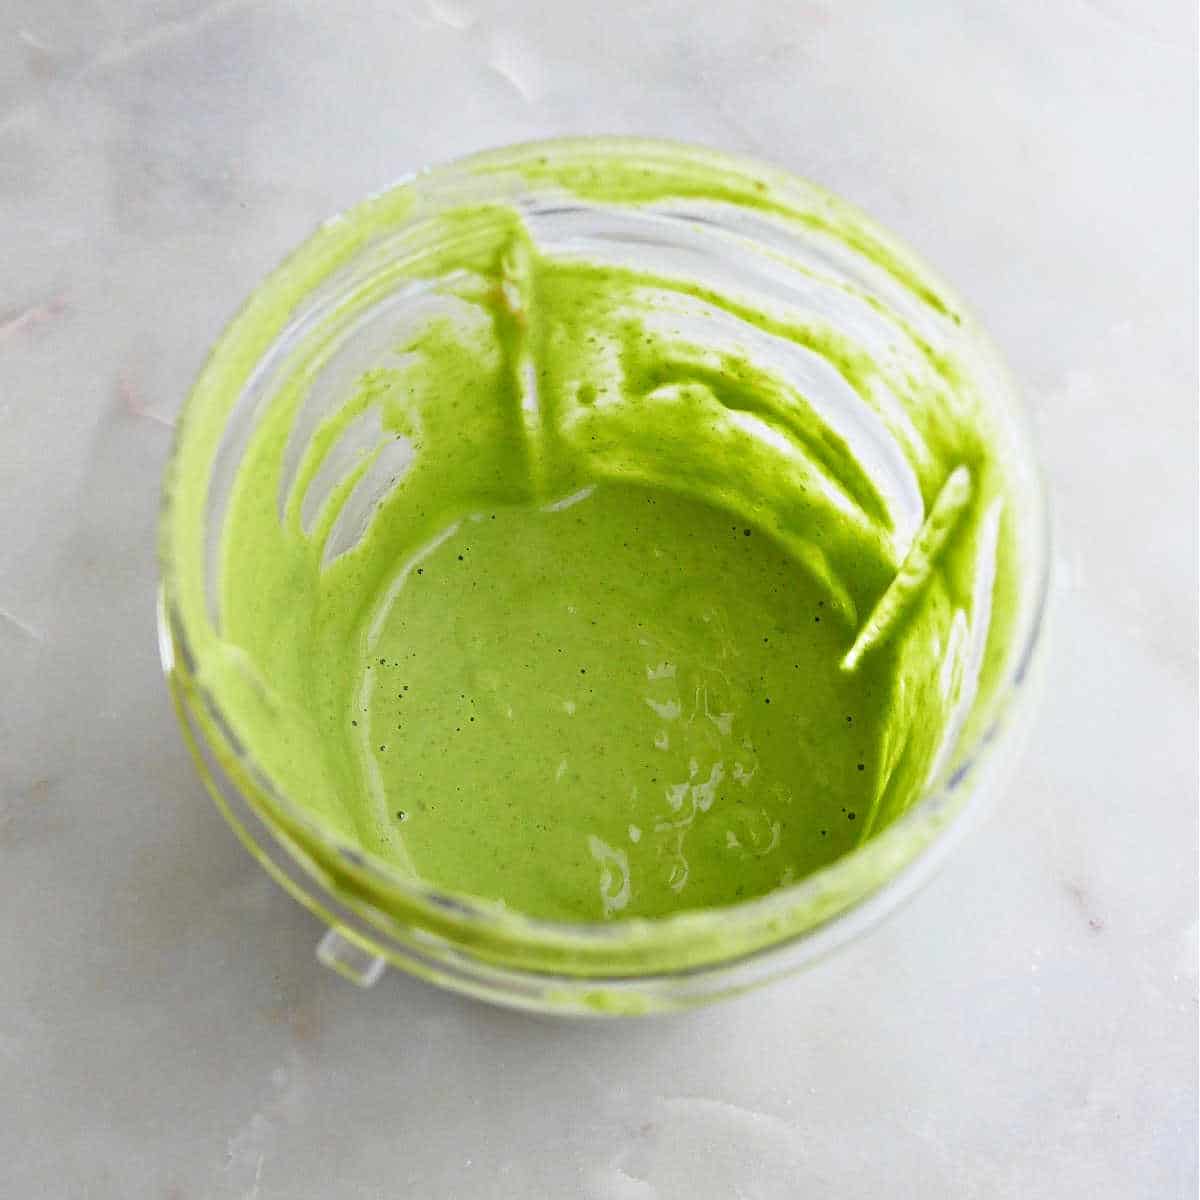 cilantro lime tahini dressing blended together in a cup